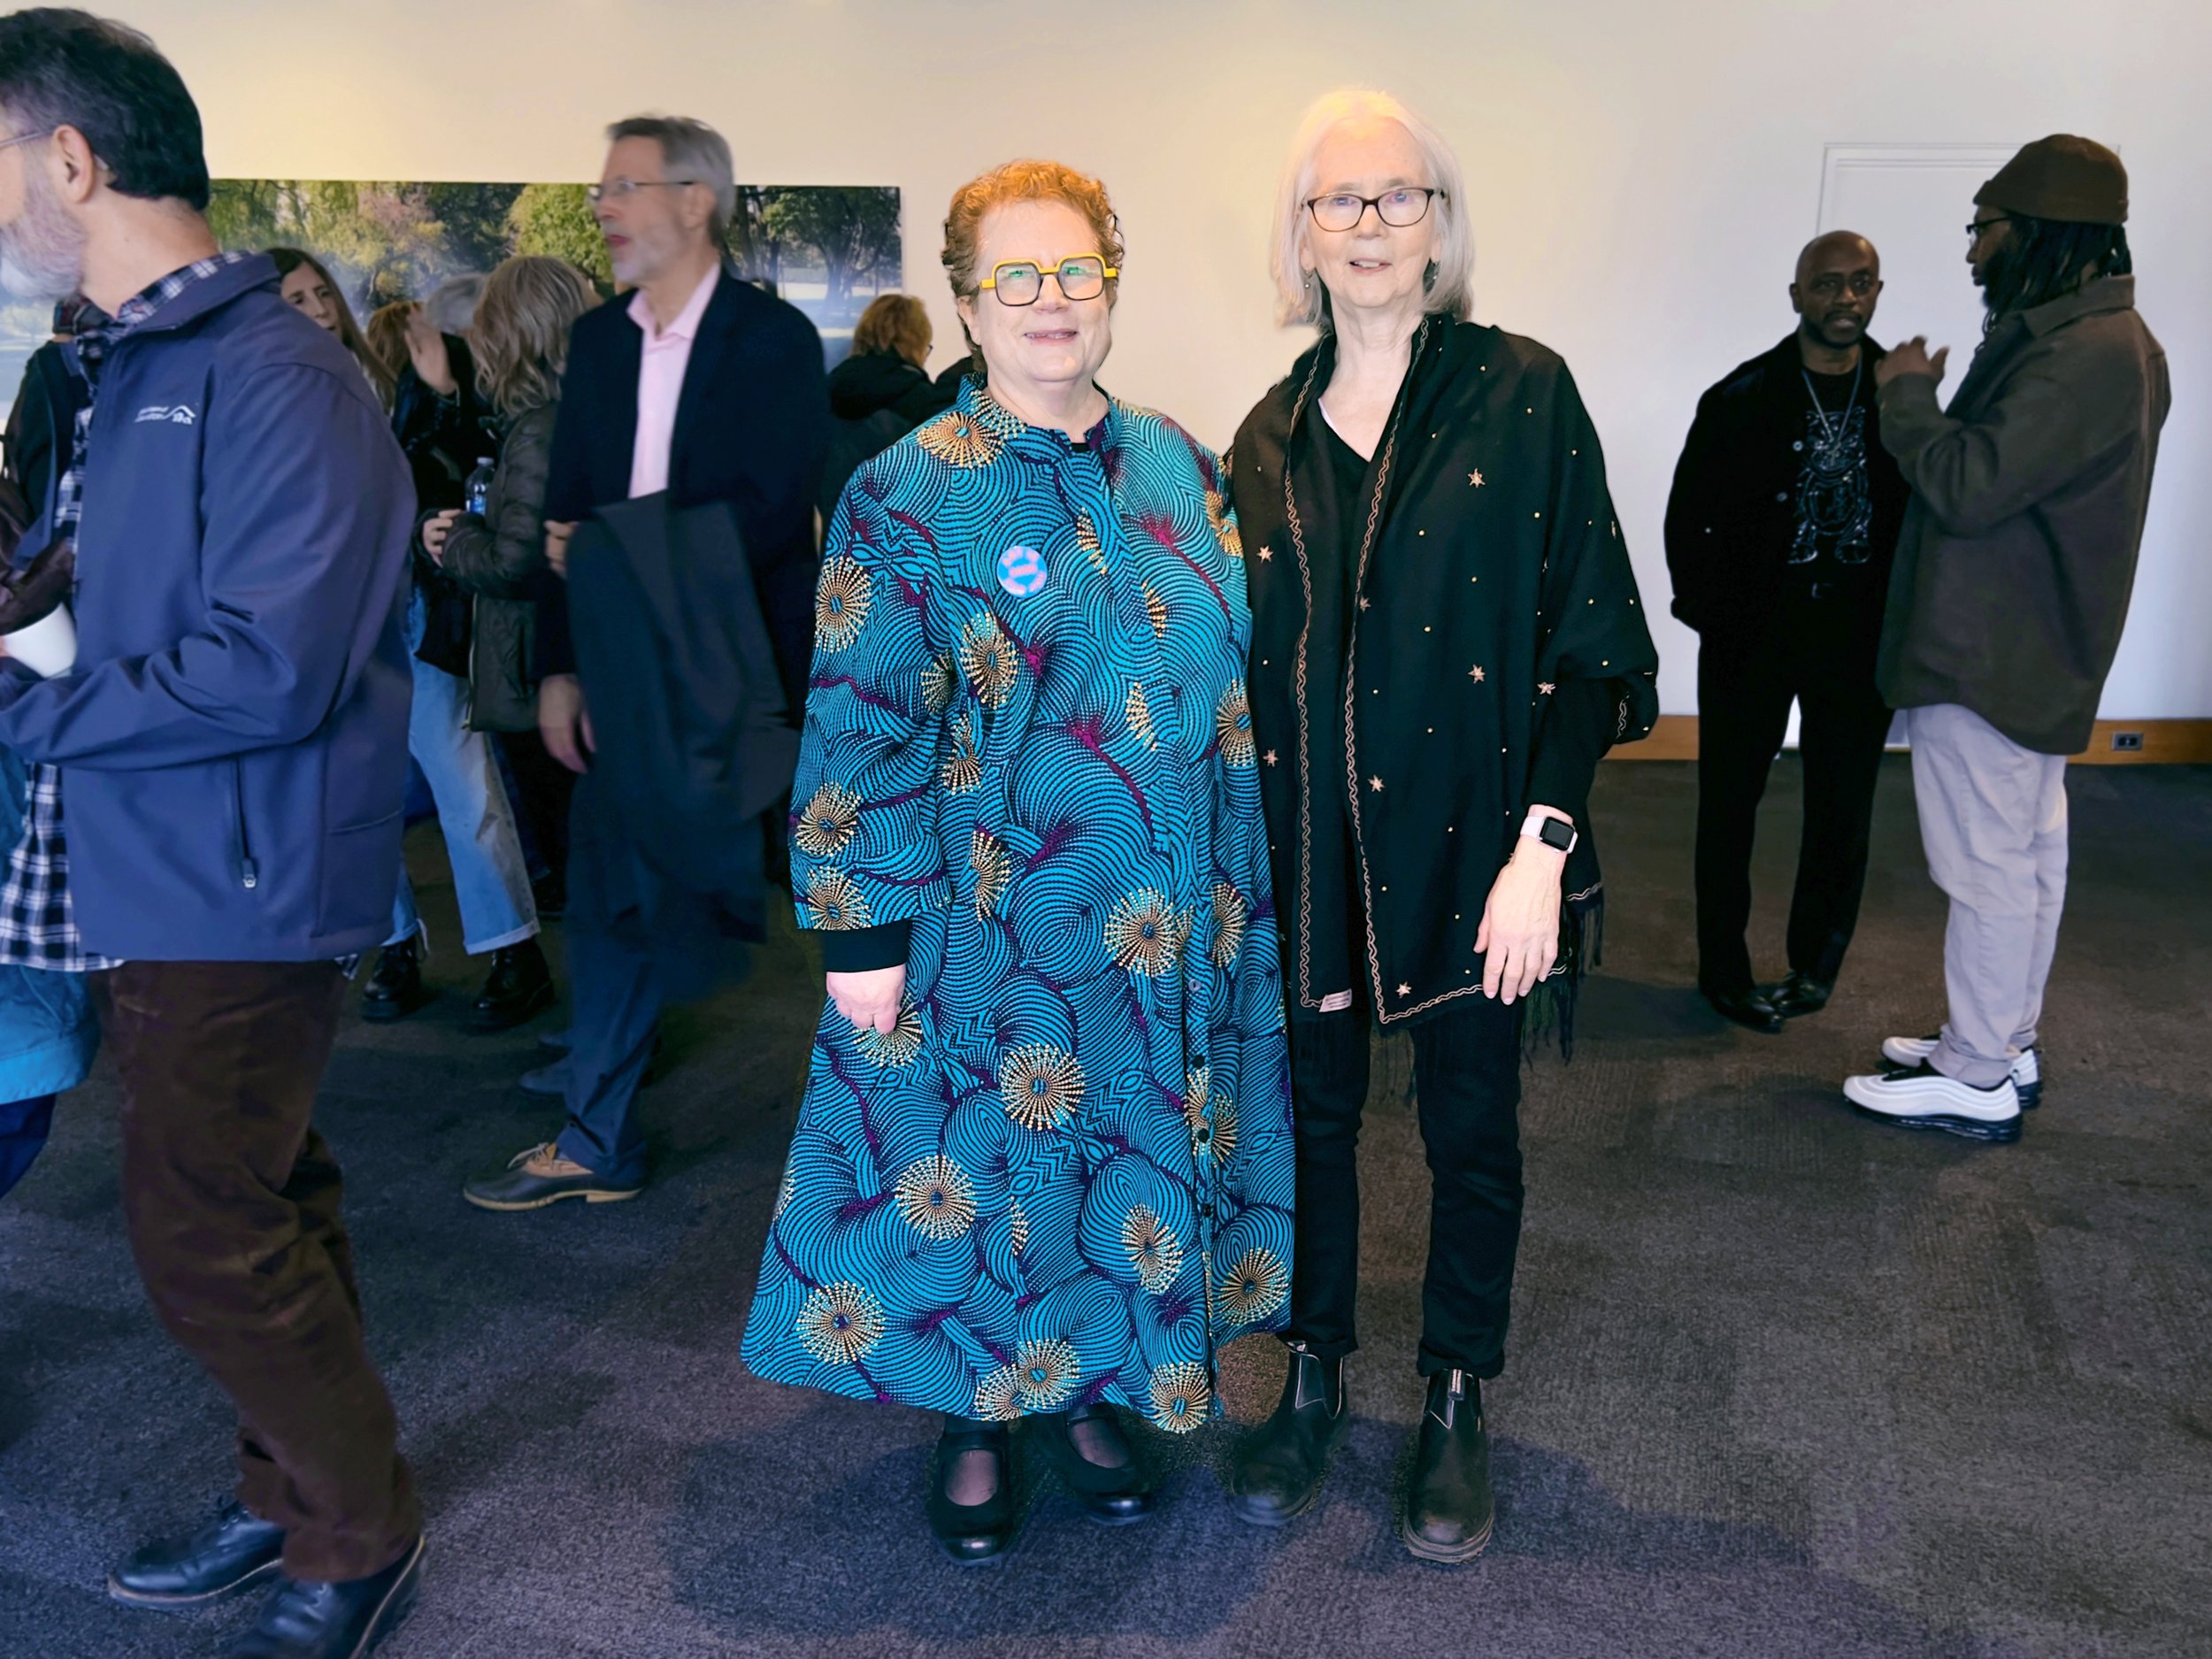  Curator of Photography at the Cleveland Museum of art and Barbara Bosworth at the opening of Sun Light Moon Shadow photos by: Billy Delfs 